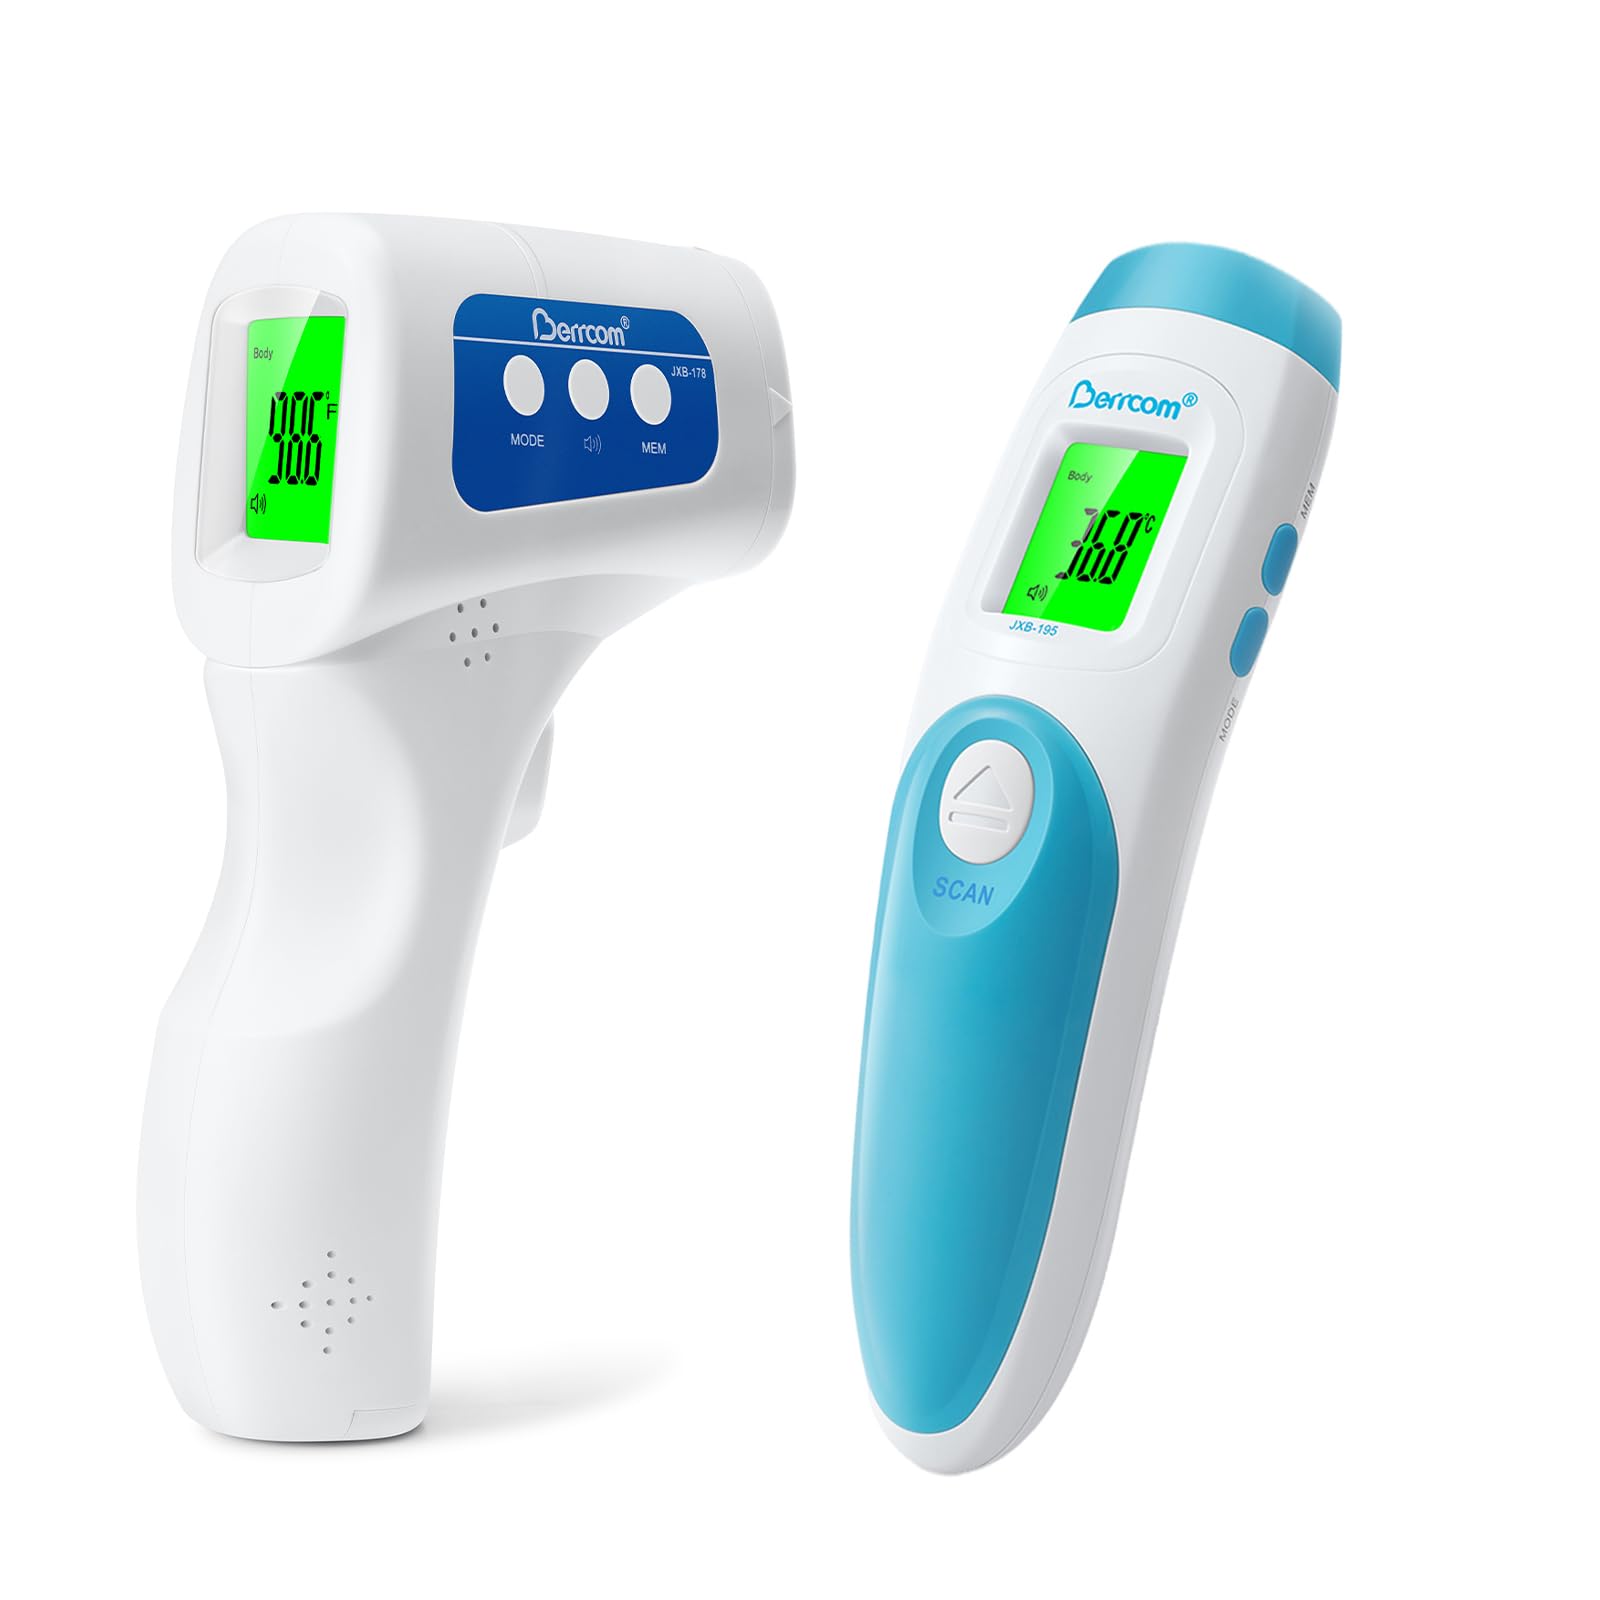 Bundle of Berrcom Non Contact Infrared Forehead Thermometer JXB-178 & JXB-195